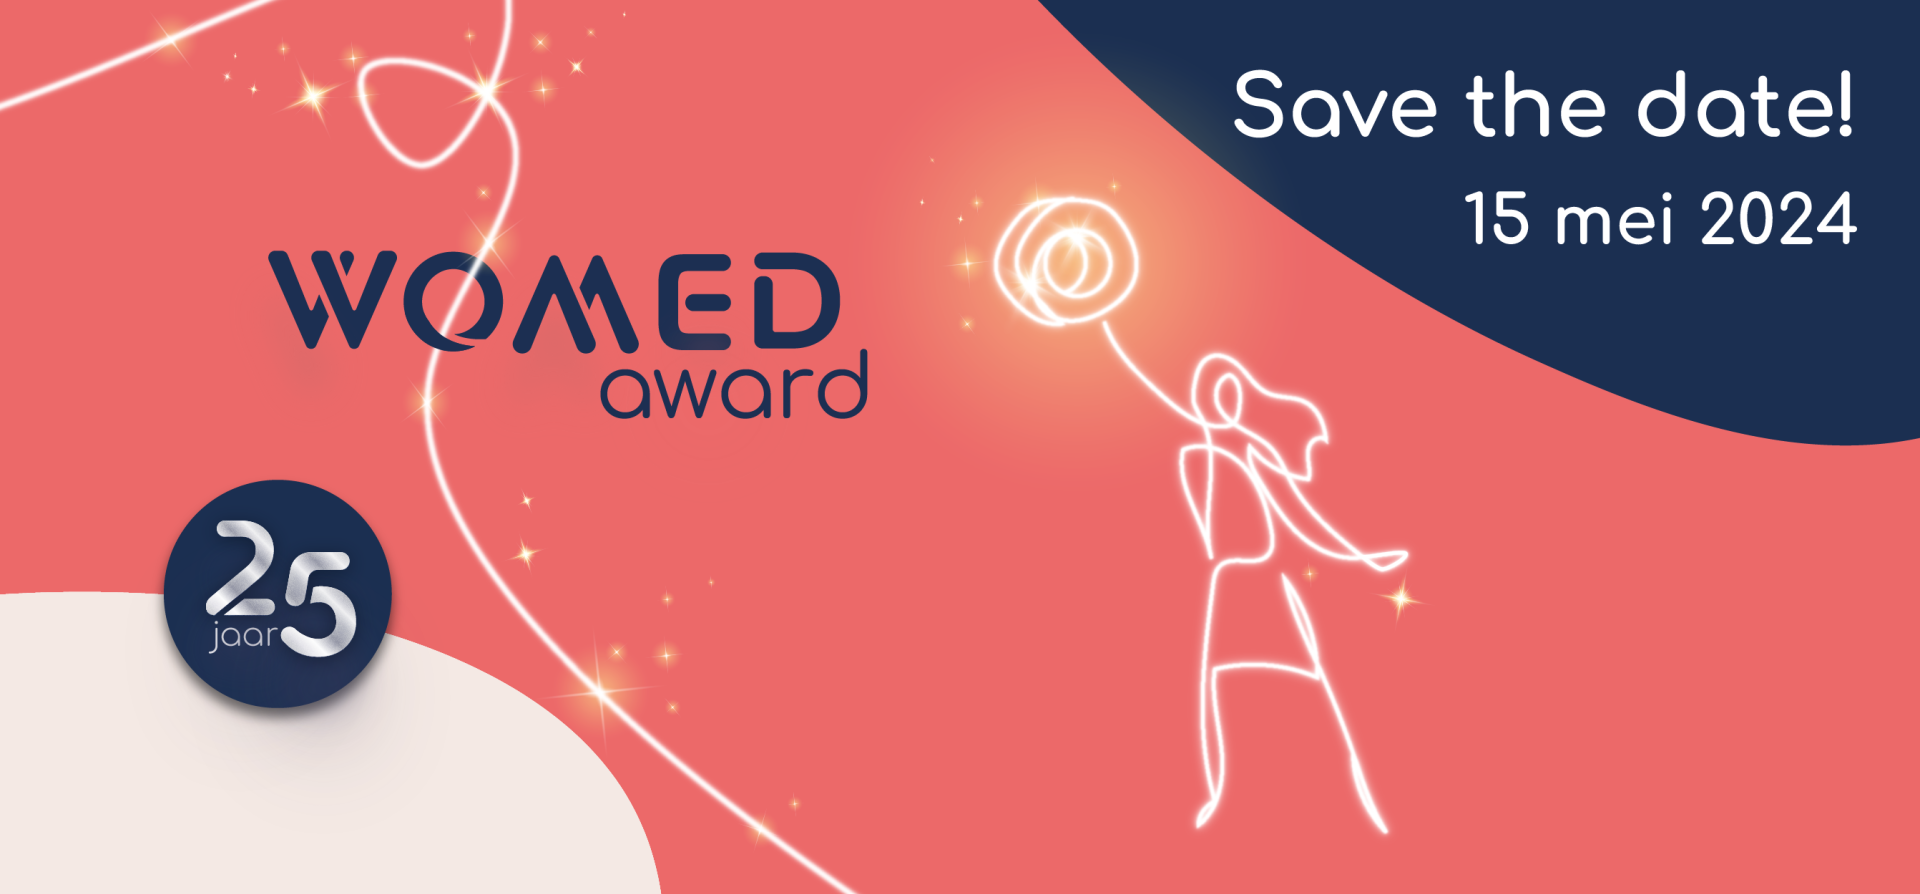 SAVE THE DATE womed award 15 mei 2024